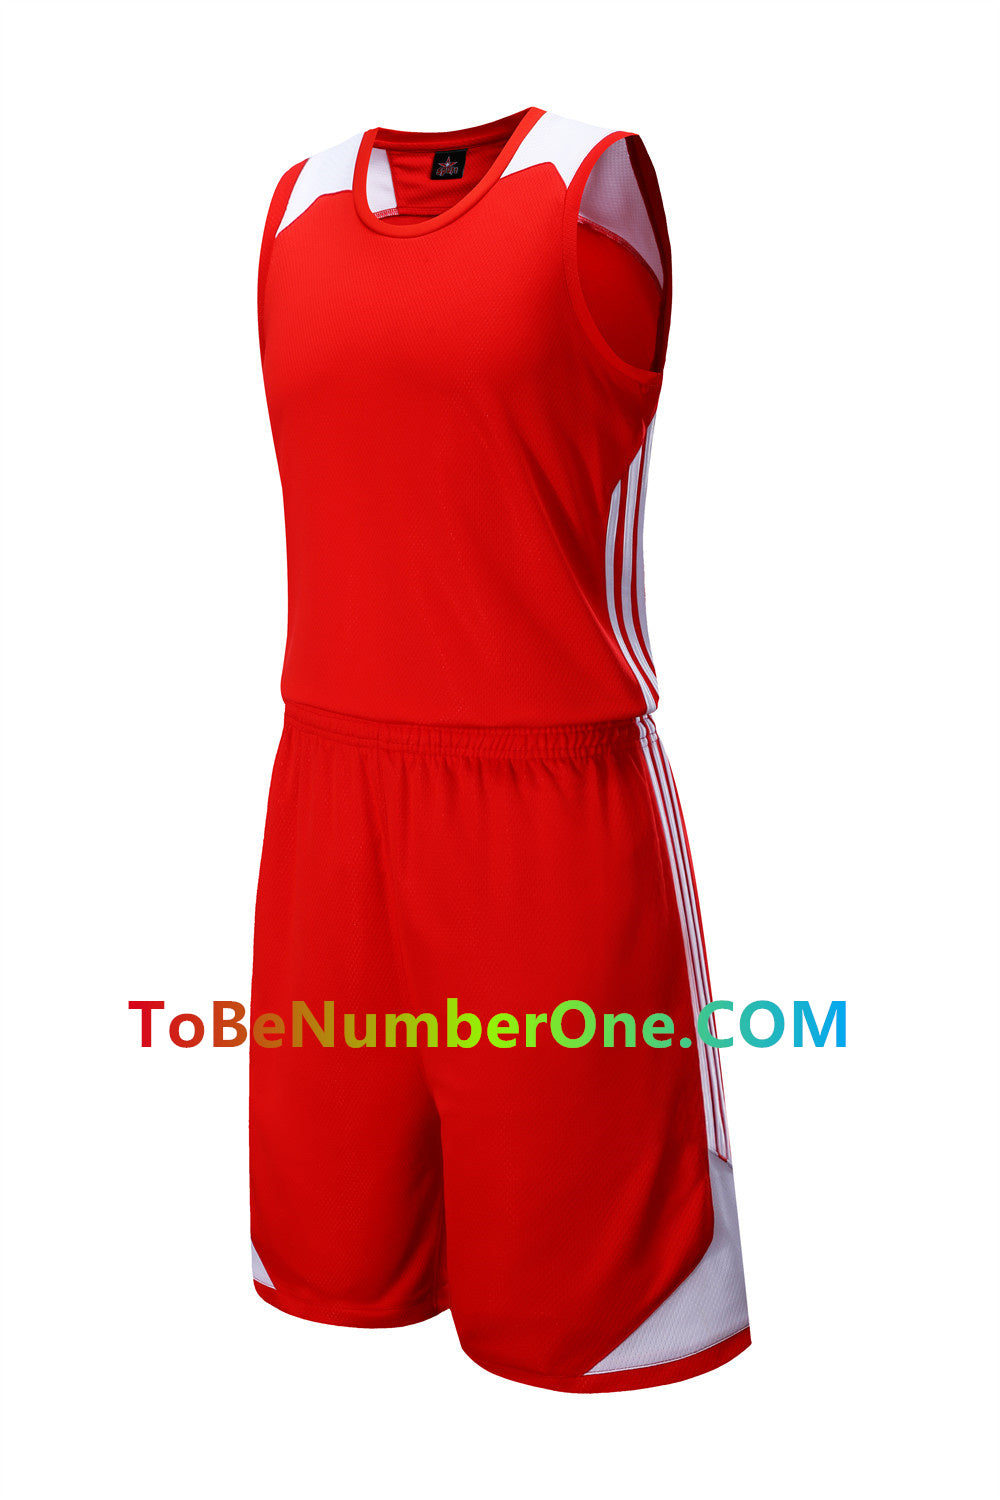 Customize instock High Quality Quick-drying jerseys basketball jerseys&shorts 711# with team name , player and number.